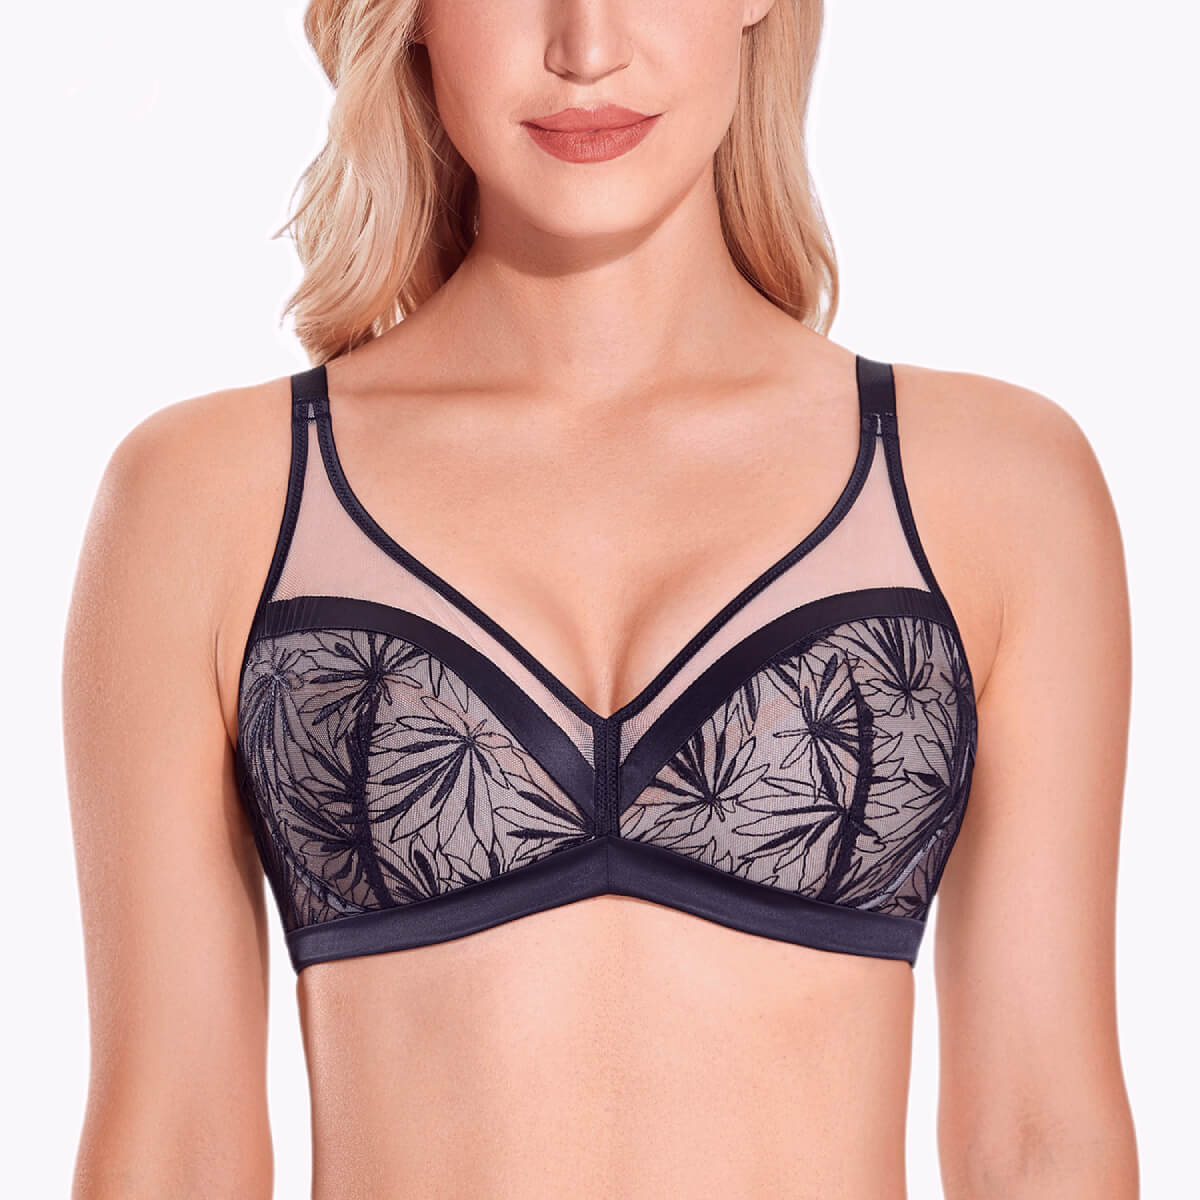 Sexy Plus Size Sheer Lace Bra